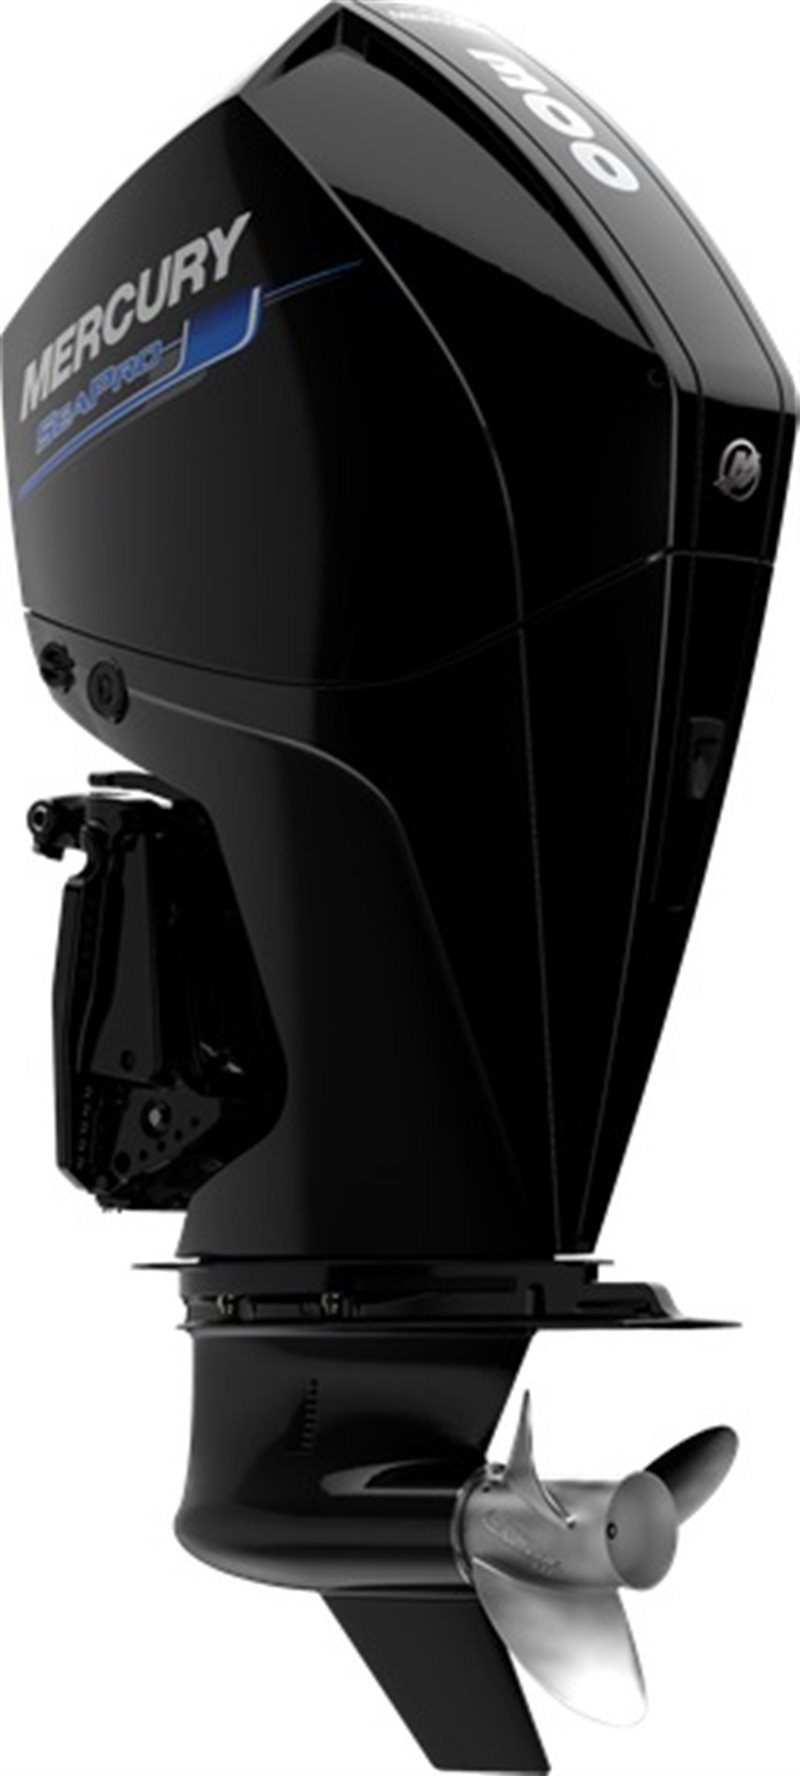 2020 Mercury Outboard SeaPro 200 - 300 SeaPro 300 CMS at Fort Fremont Marine